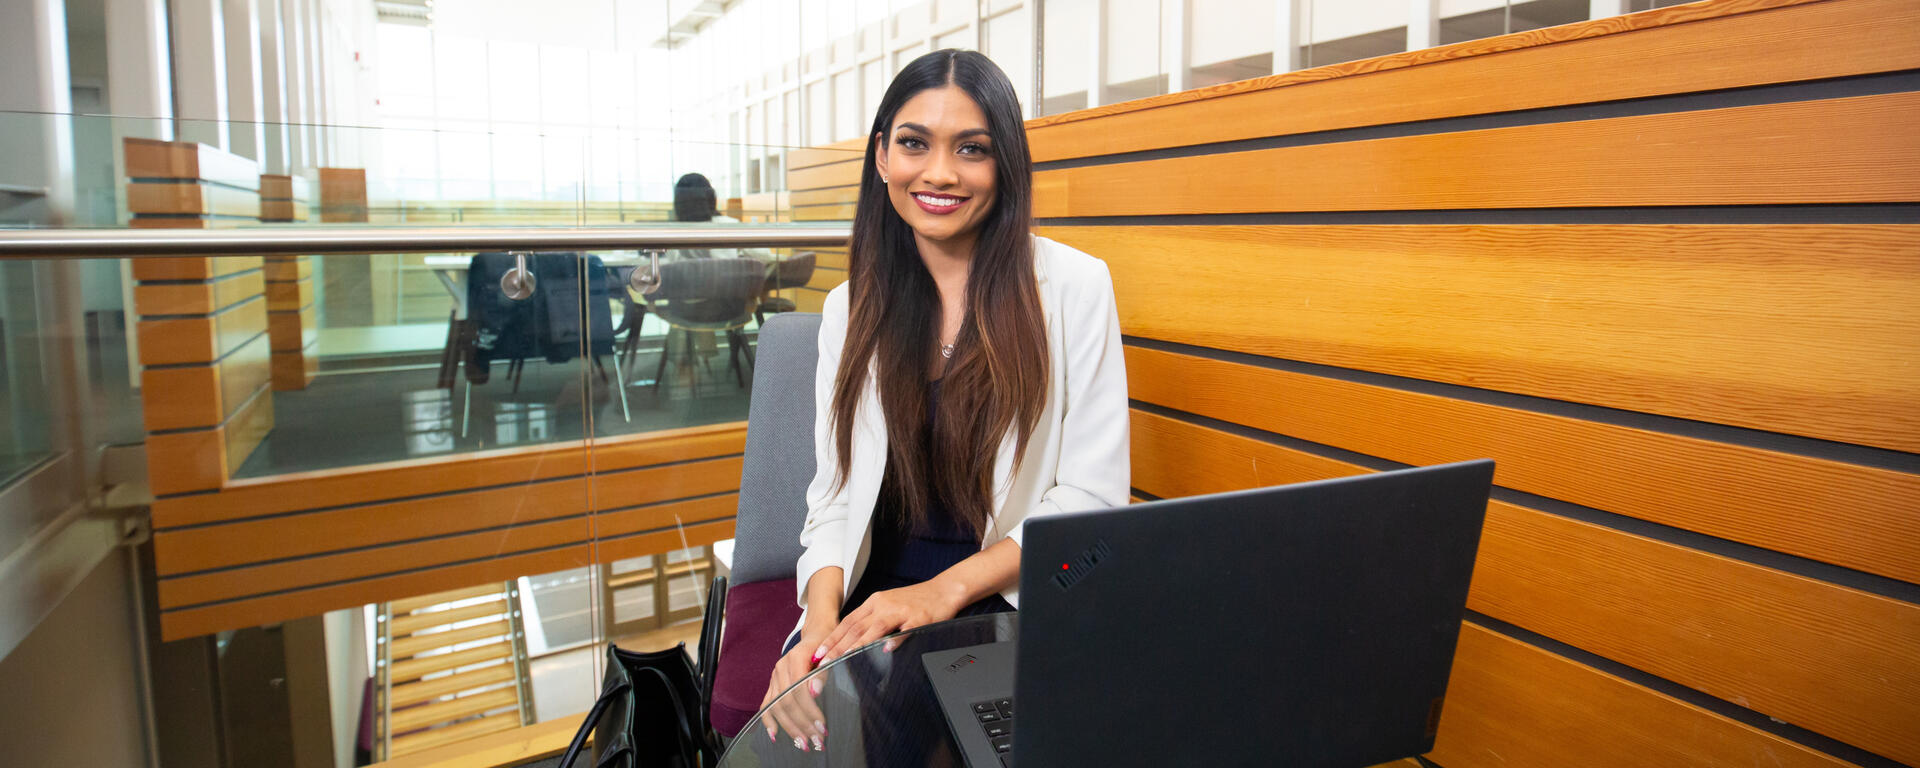 Faculty of Science grad Samiha Hoque begins her career as a web application developer with Sproule, a Calgary-based energy consulting company.